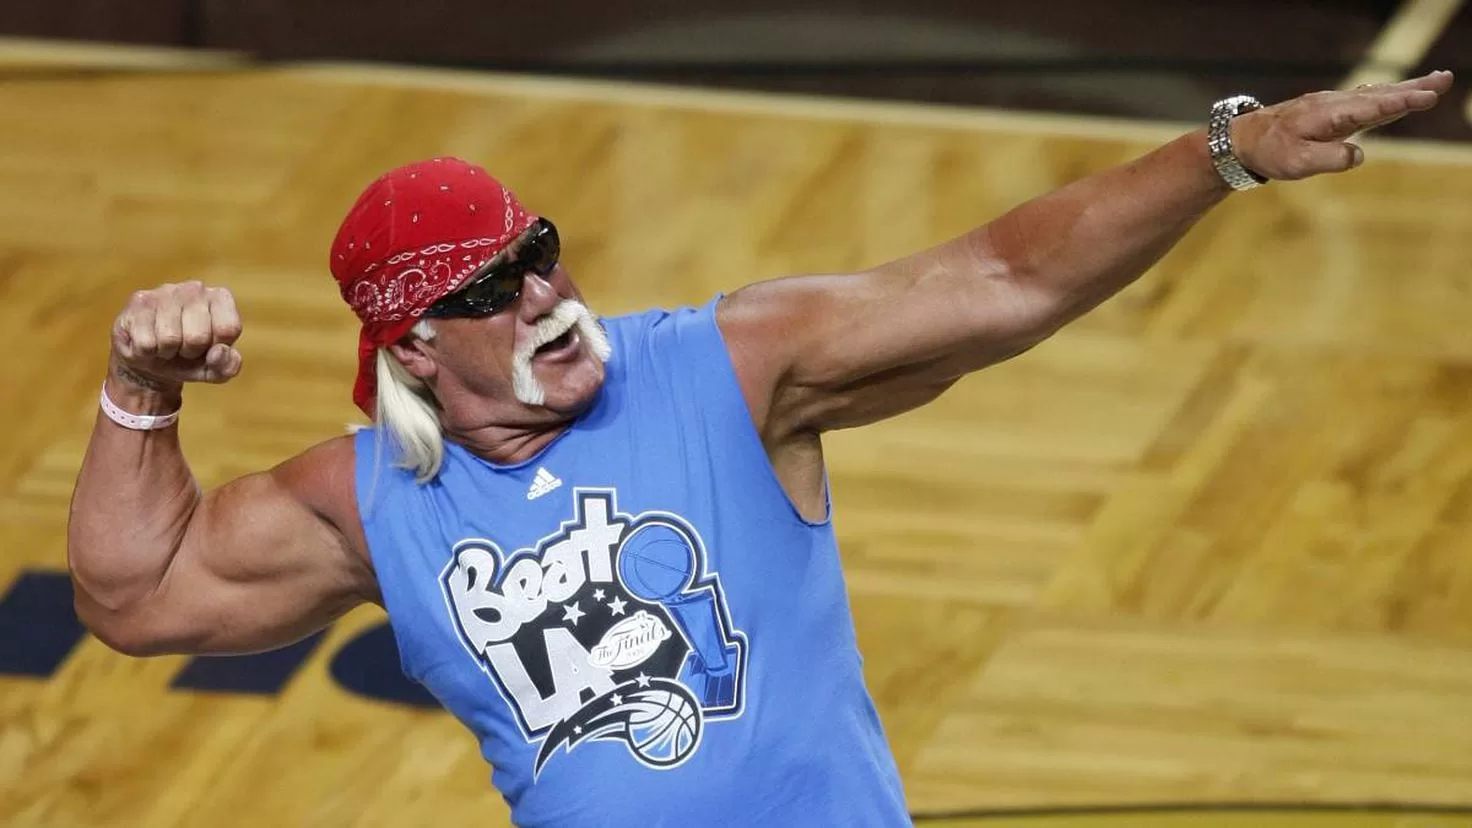 The most important day of Hulk Hogan's life: he is baptized at age 70
